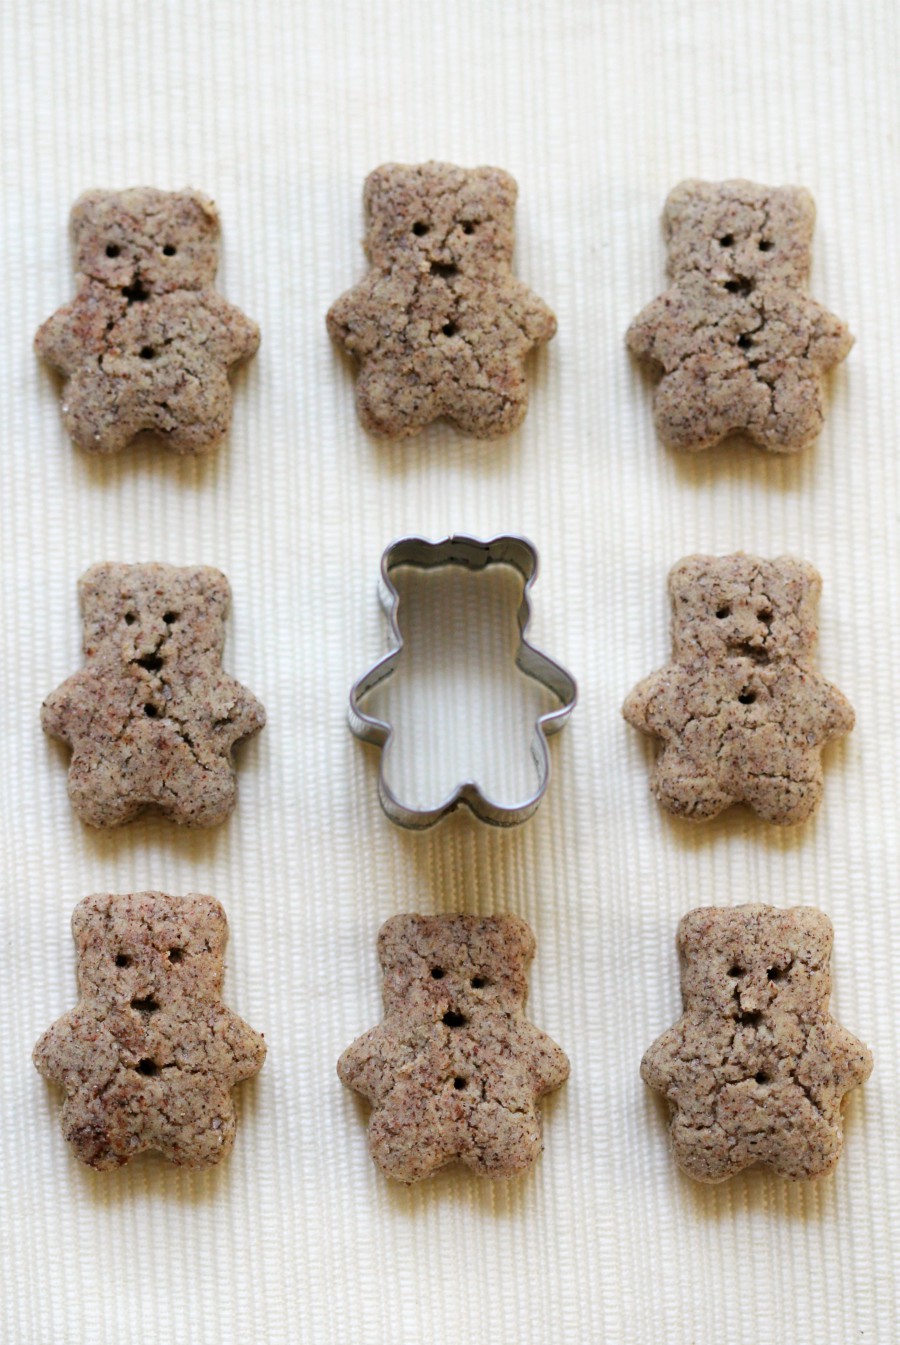 Homemade Gluten-Free Teddy Grahams (Vegan, Allergy-Free) | Strength and Sunshine @RebeccaGF666 A kid-friendly snack time favorite! Homemade Gluten-Free Teddy Grahams that are vegan, top-8 allergy-free, even sugar-free and whole grain! A recipe with options for different flavor variations, these adorable little bears with be gobbled up by little hands (and big ones too!) #teddygrahams #glutenfree #vegan #allergyfree #kidfriendly #kidfood #healthysnacks